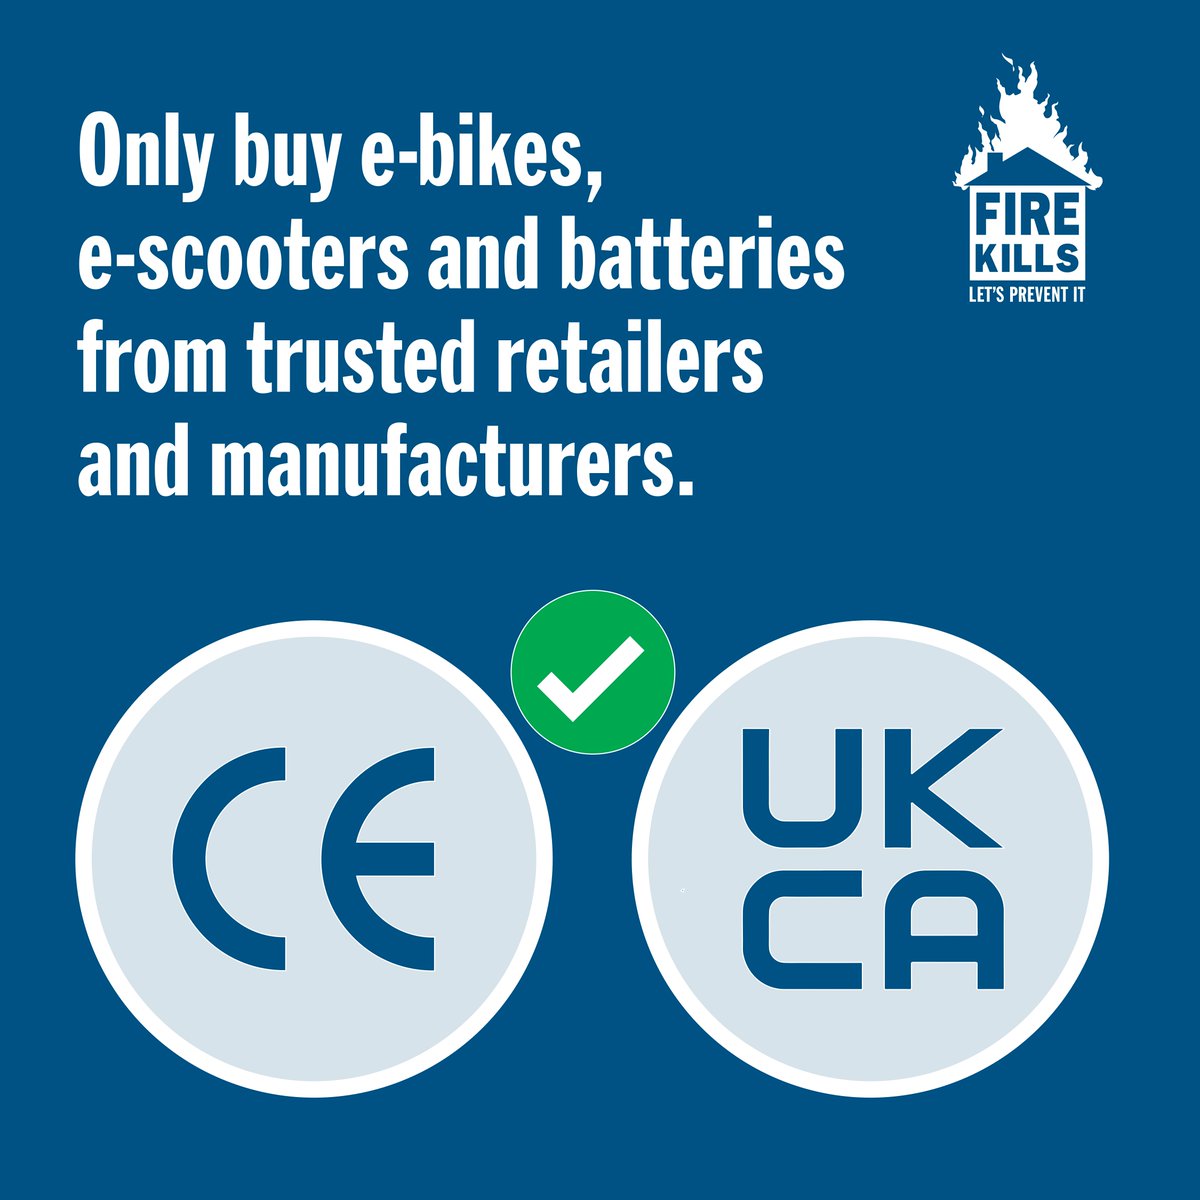 Only buy e-bikes, e-scooters and batteries from trusted retailers and manufacturers. To find out more about fire safety and electric bikes and e-scooters, head to ow.ly/OW3250QLqnb